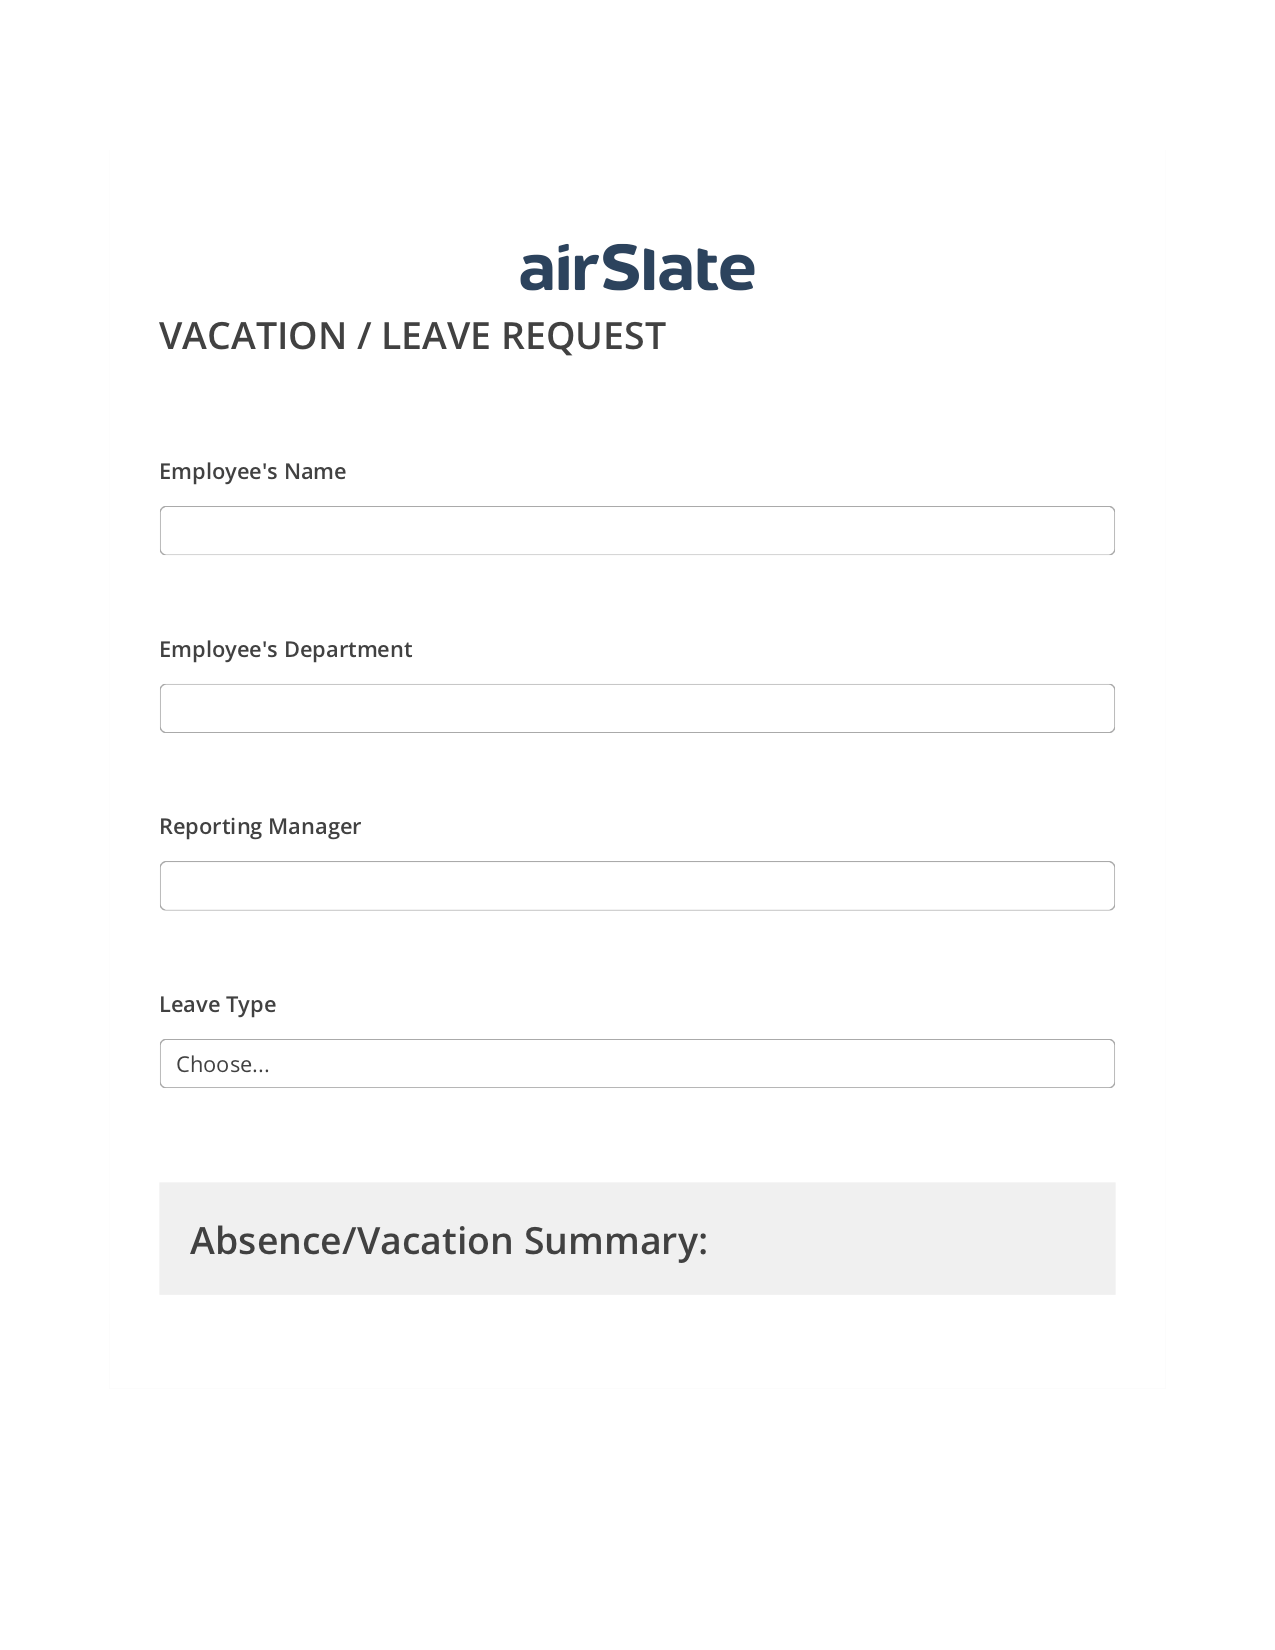 Multirole Vacation/Leave Request Workflow System Bot - Slack Two-Way Binding Bot, Custom Field's Value Bot, Export to Smartsheet